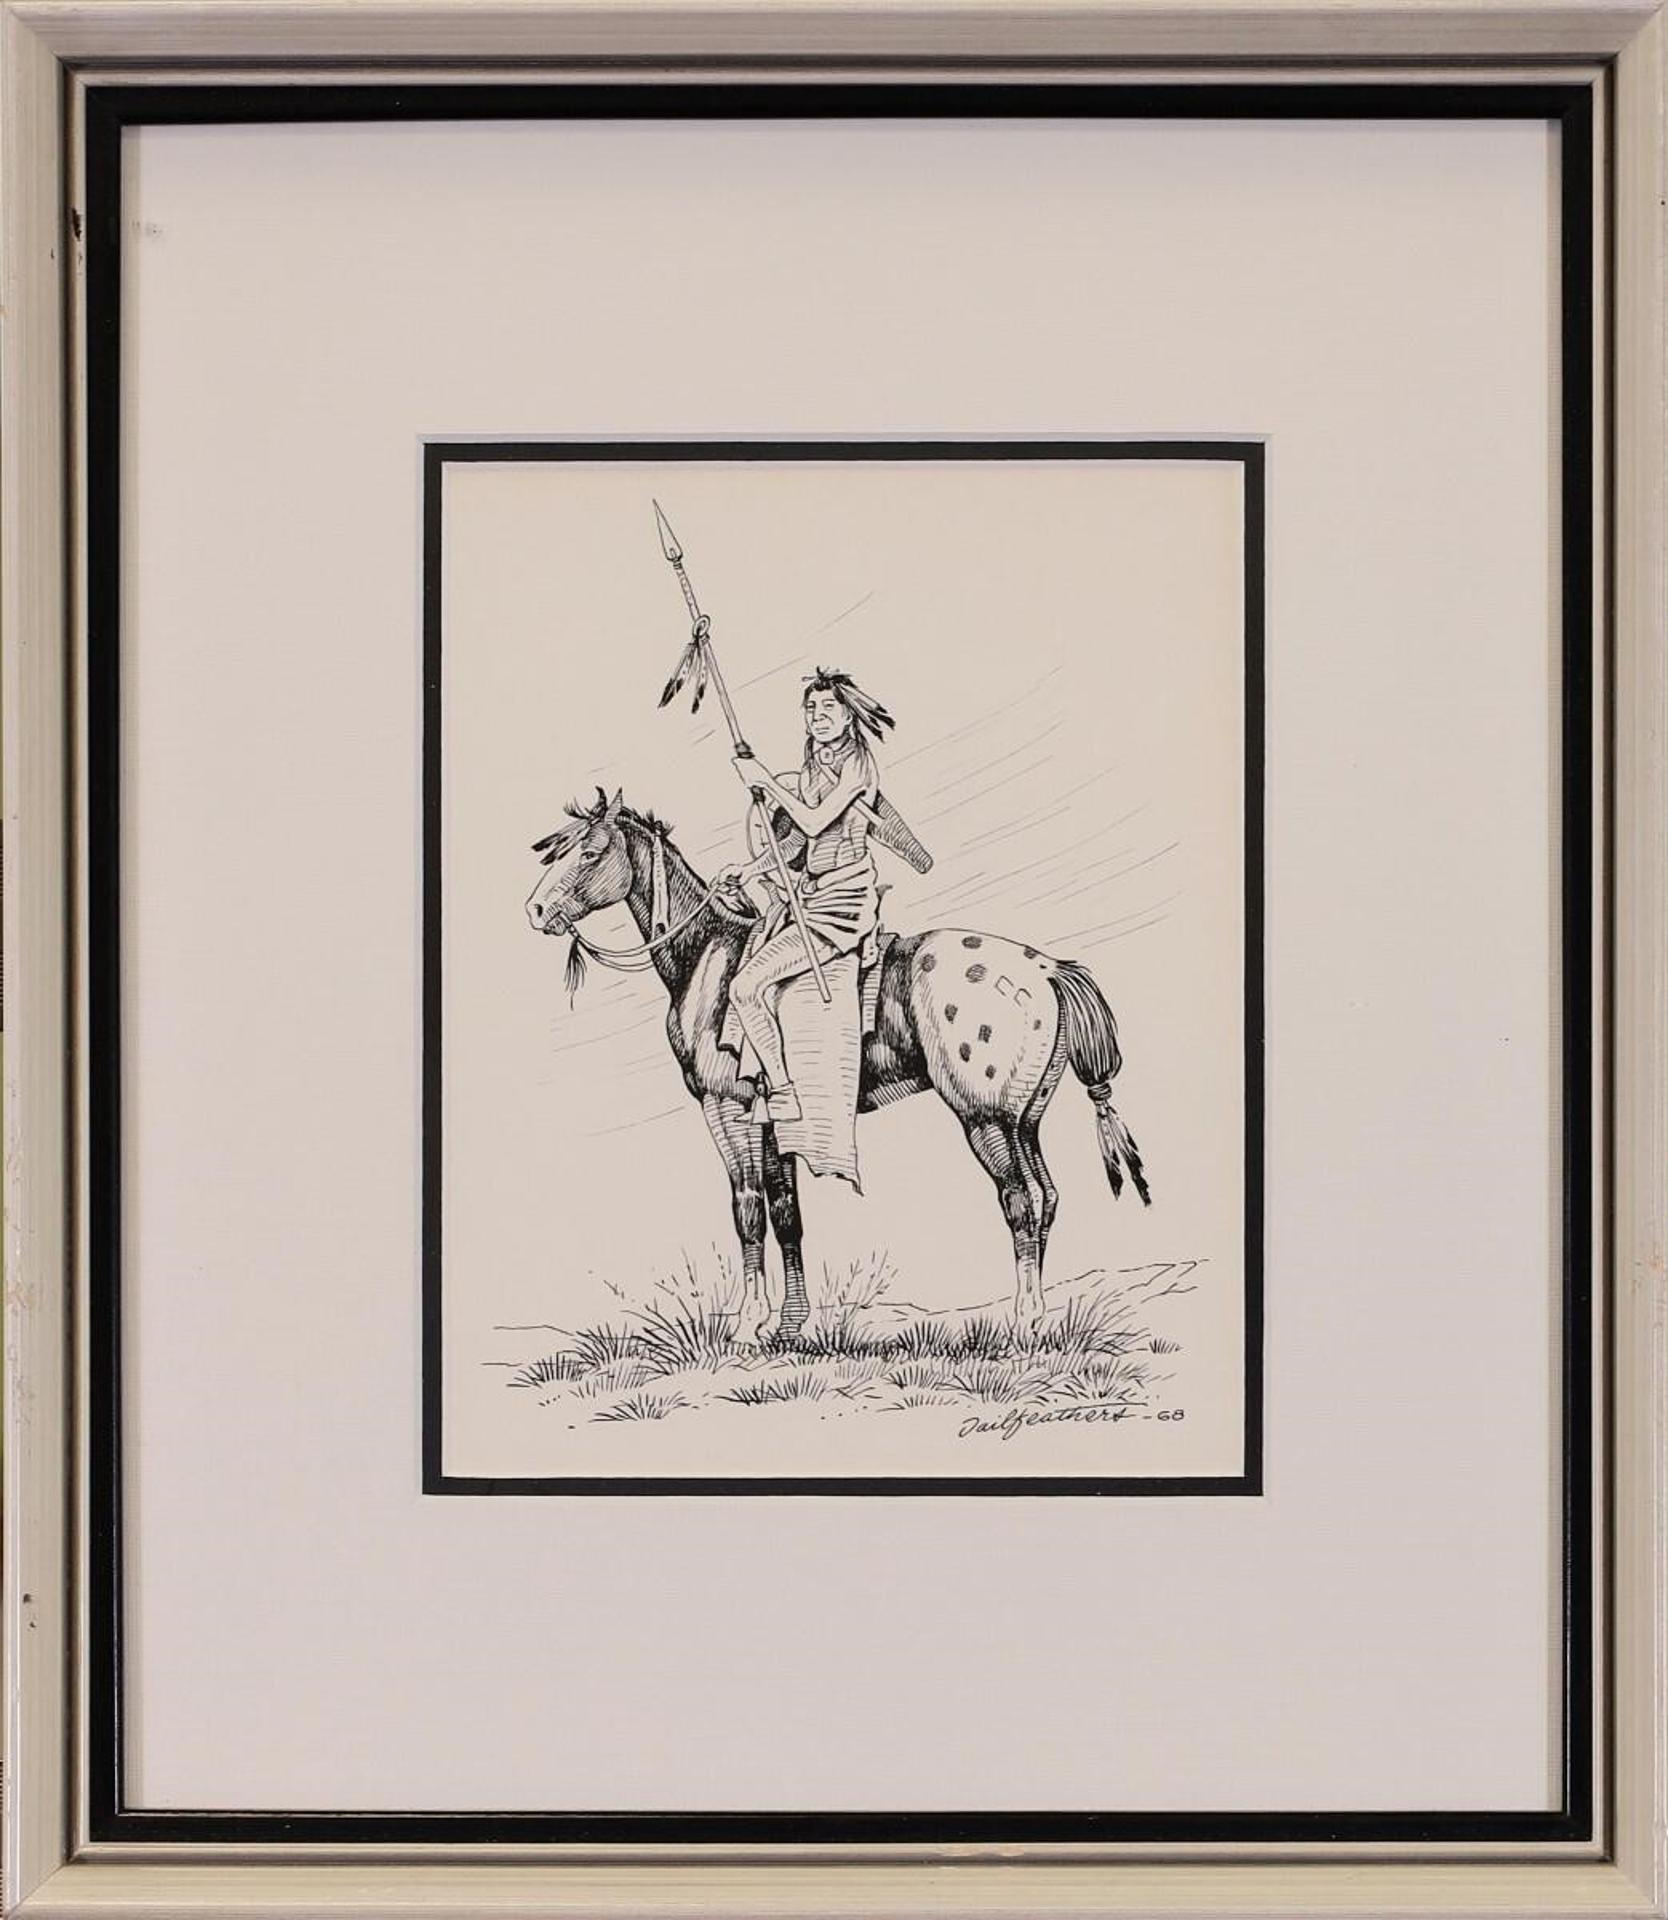 Gerald T. Tailfeathers (1925-1975) - Untitled, Rider with Spear on Appaloosa; 1968